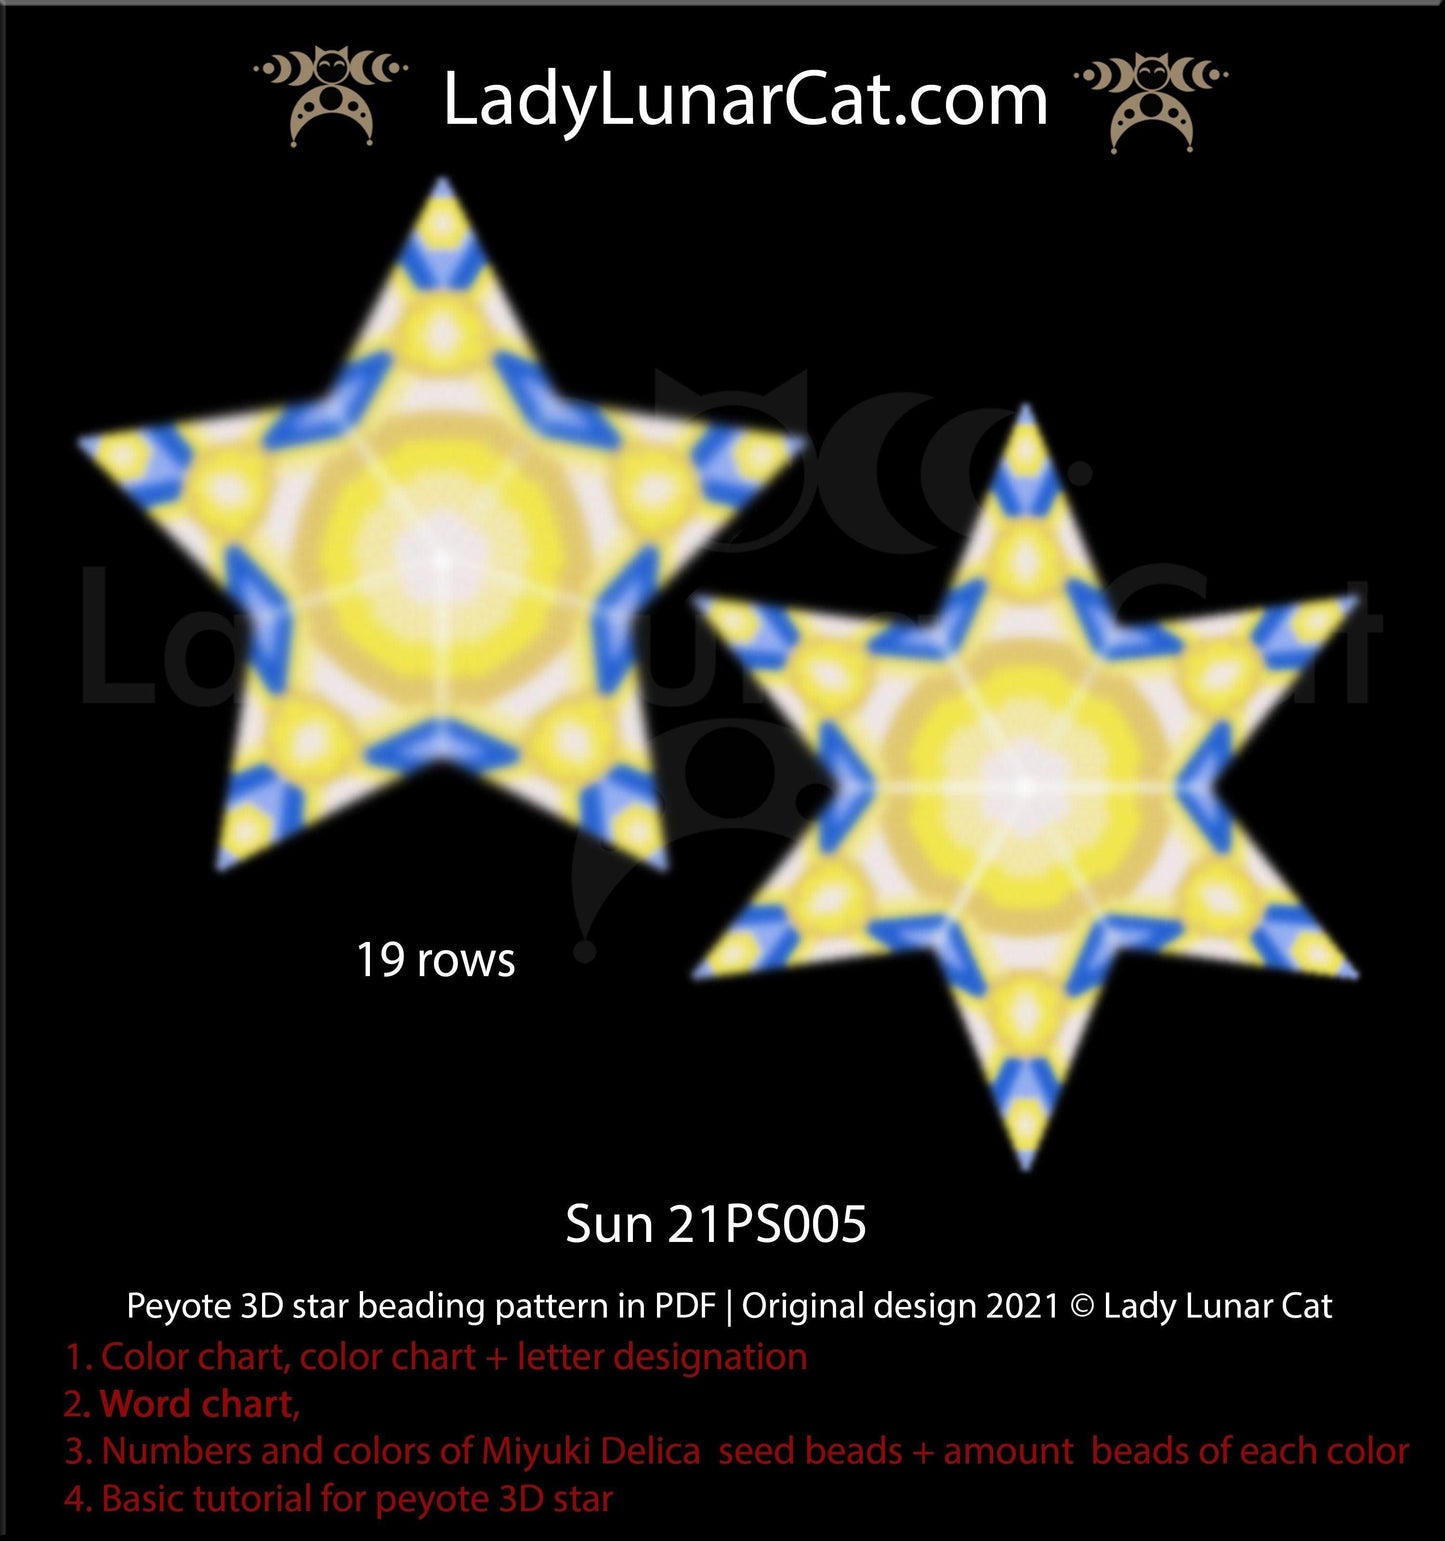 Copy of Beaded star pattern - Love Labradors 21PS003 | Seed beads tutorial for 3D peyote star LadyLunarCat